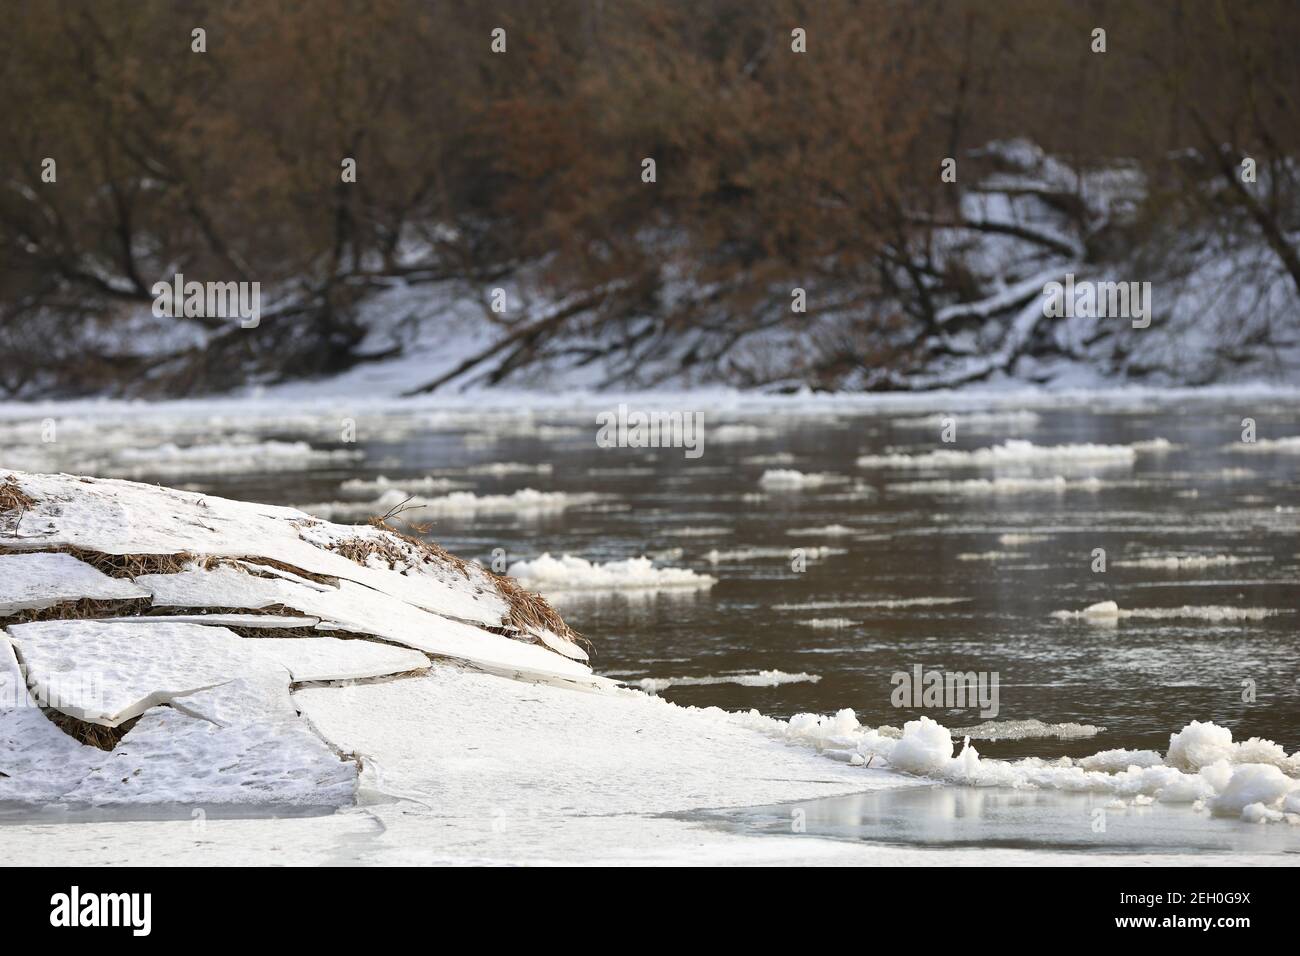 The river hung in winter, thaw by the river, trees by the shore, tree stump in the ice, snow and floe on the river Stock Photo